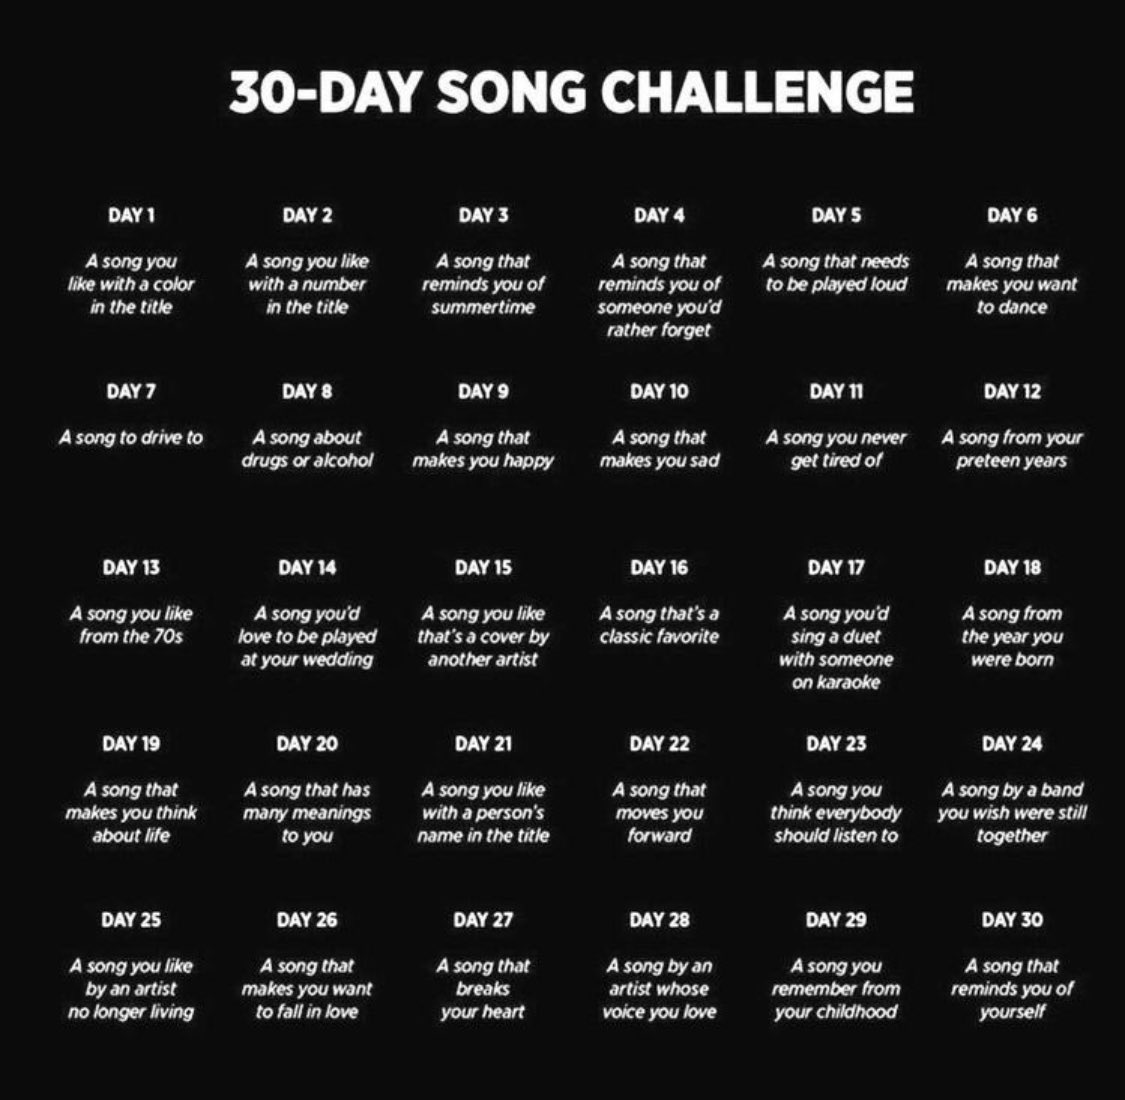 We have now reached double digits -  #Day10 of the  #30DaySongChallenge.Today we're looking for sad songs (that say so much). @RealCuckolding @KeysandAnklets @KeyBarrettMSc @nnjcuckcouple @minimusmaxim @hitherecatsuit @MsTr3ss @EnigmaticVixens @hotwife463 @JaneEBoon @sexpospsych